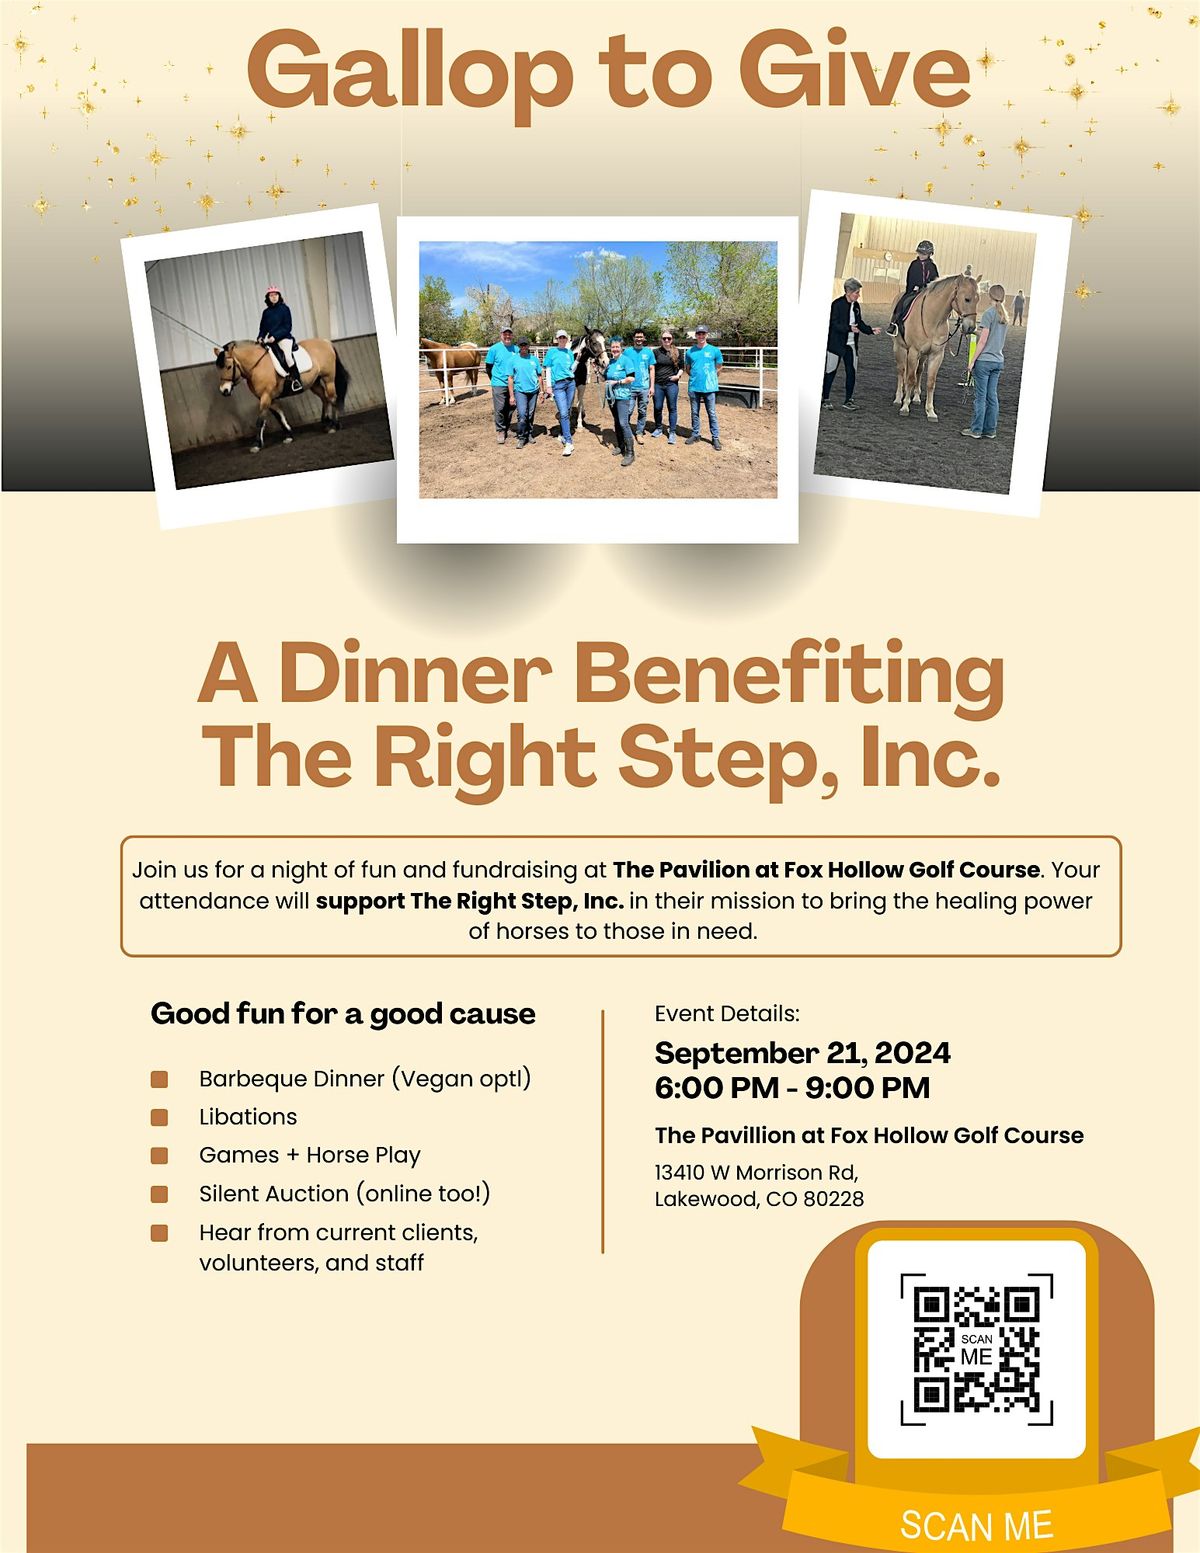 Gallop to Give- A Fundraiser Benefiting The Right Step, Inc.